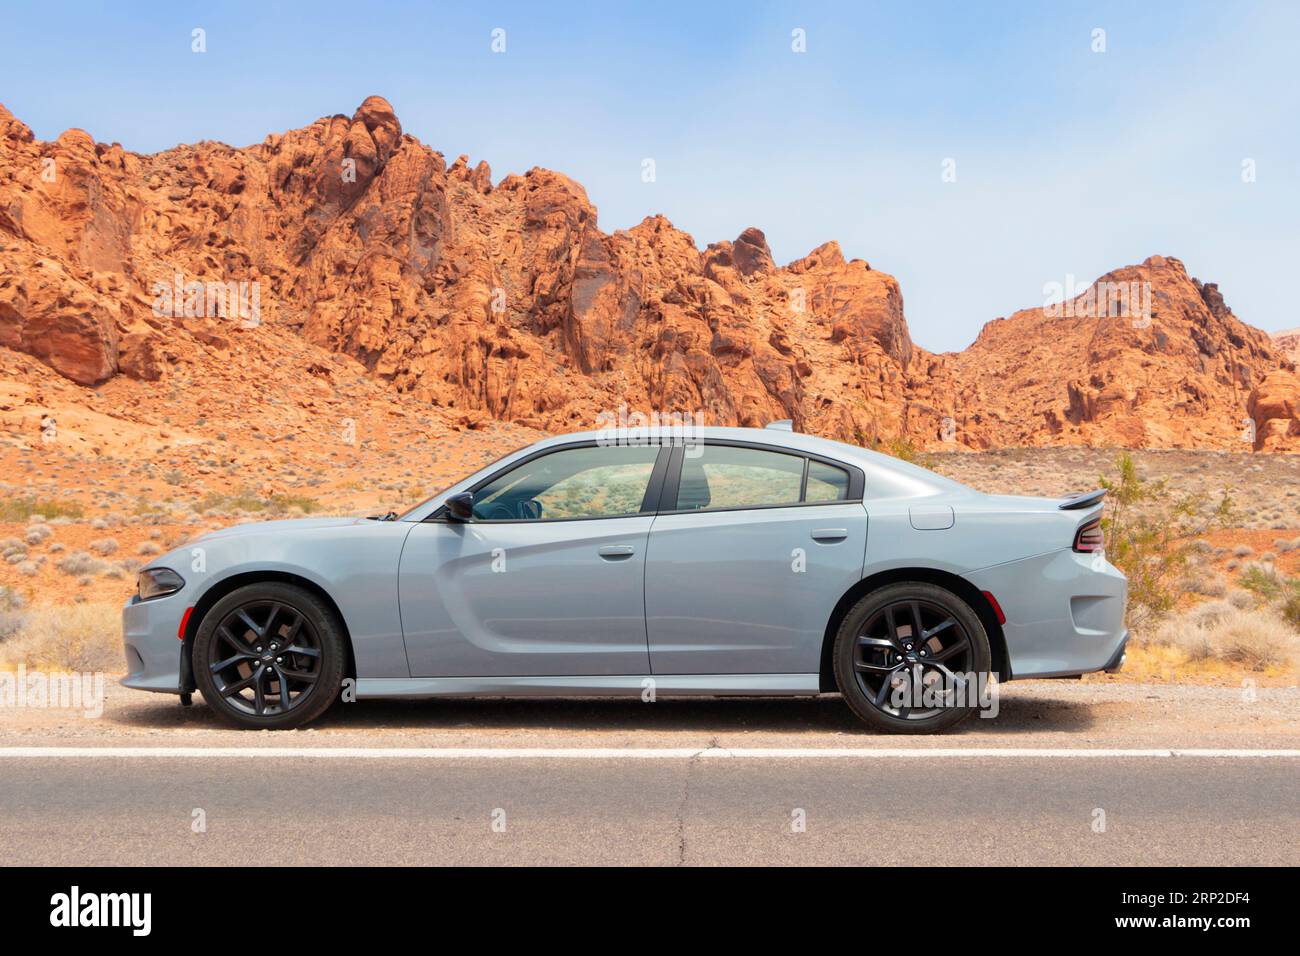 grey gray mucle car Dodge charger side view parked in utah desert Stock Photo